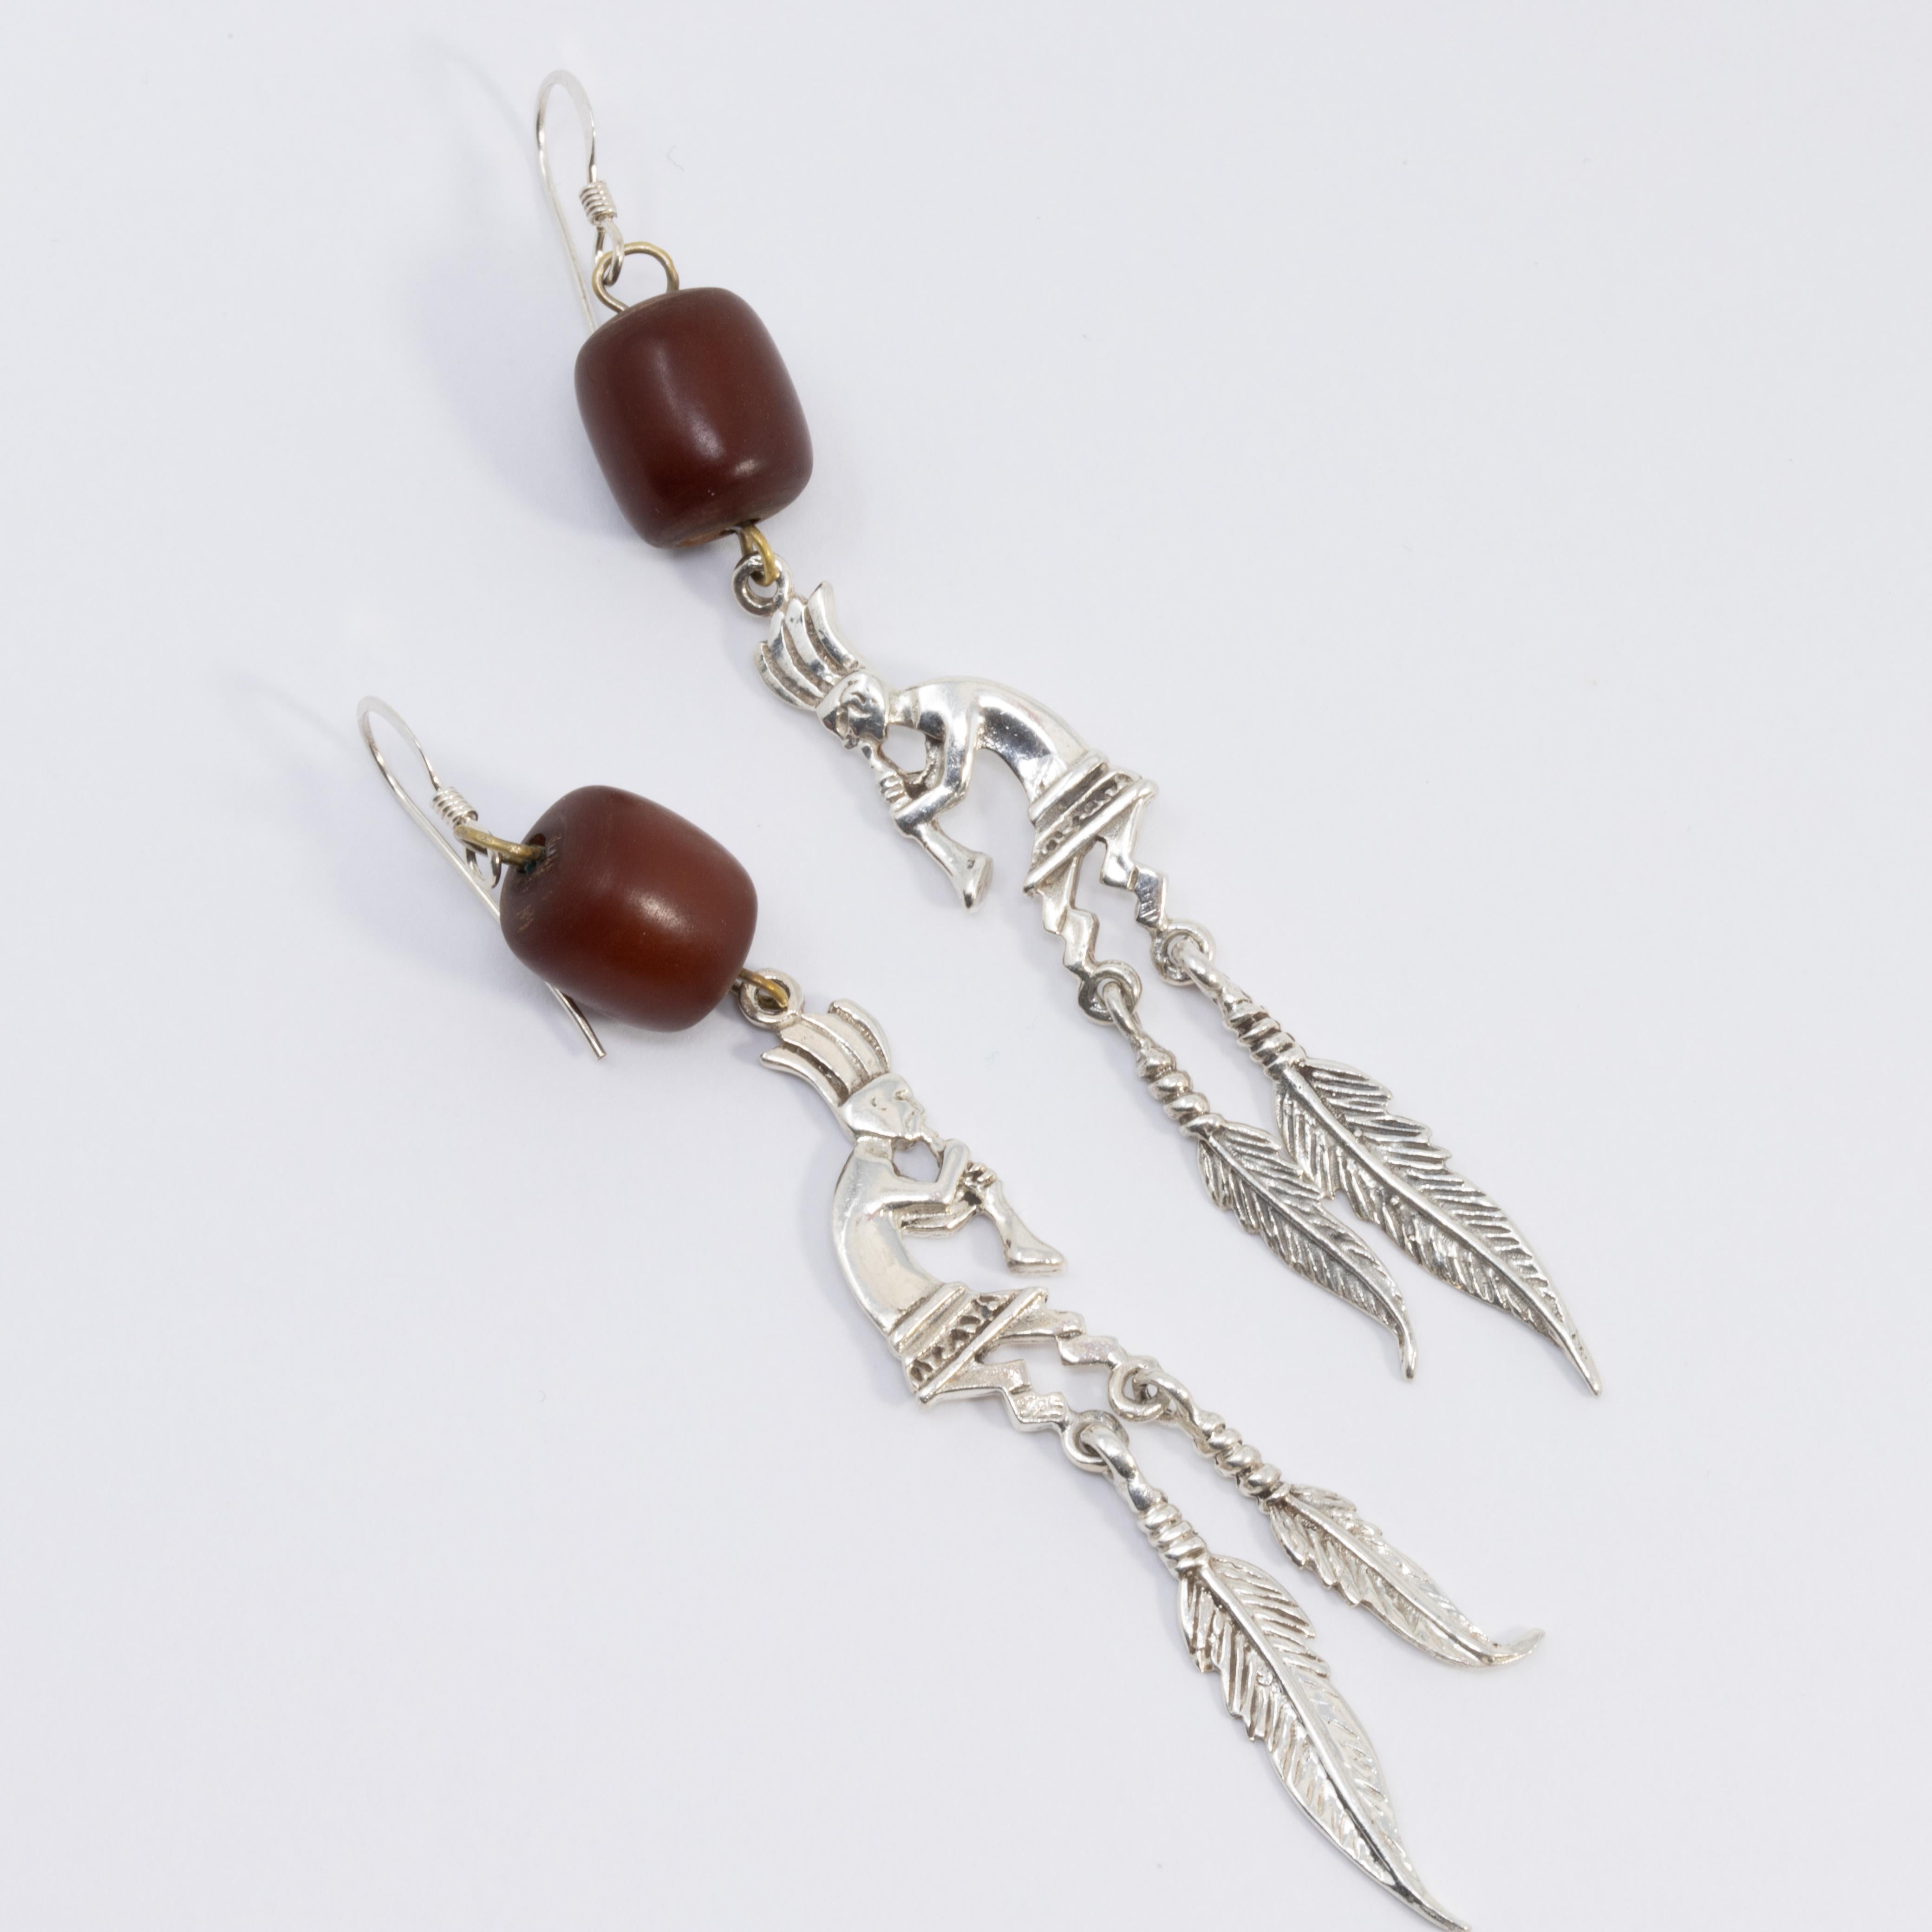 A southwestern style pair of Native American earrings. Features two dangling feathers and a performing horn player, accented with a single ____ bead.

Hook wire hardware